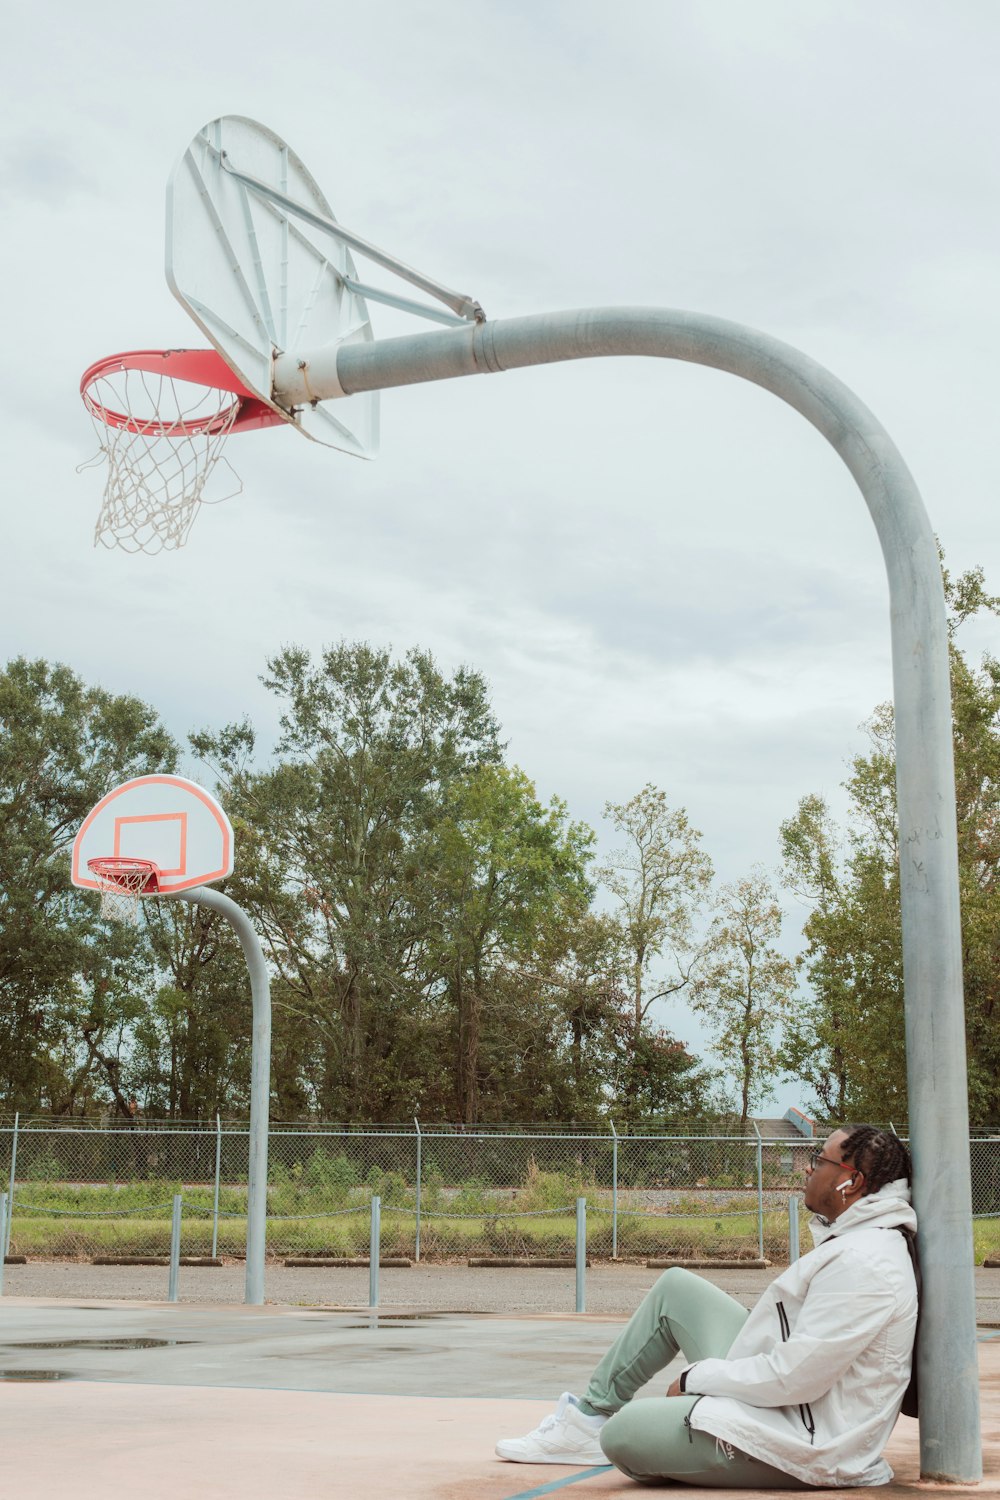 a man sitting on the ground next to a basketball hoop